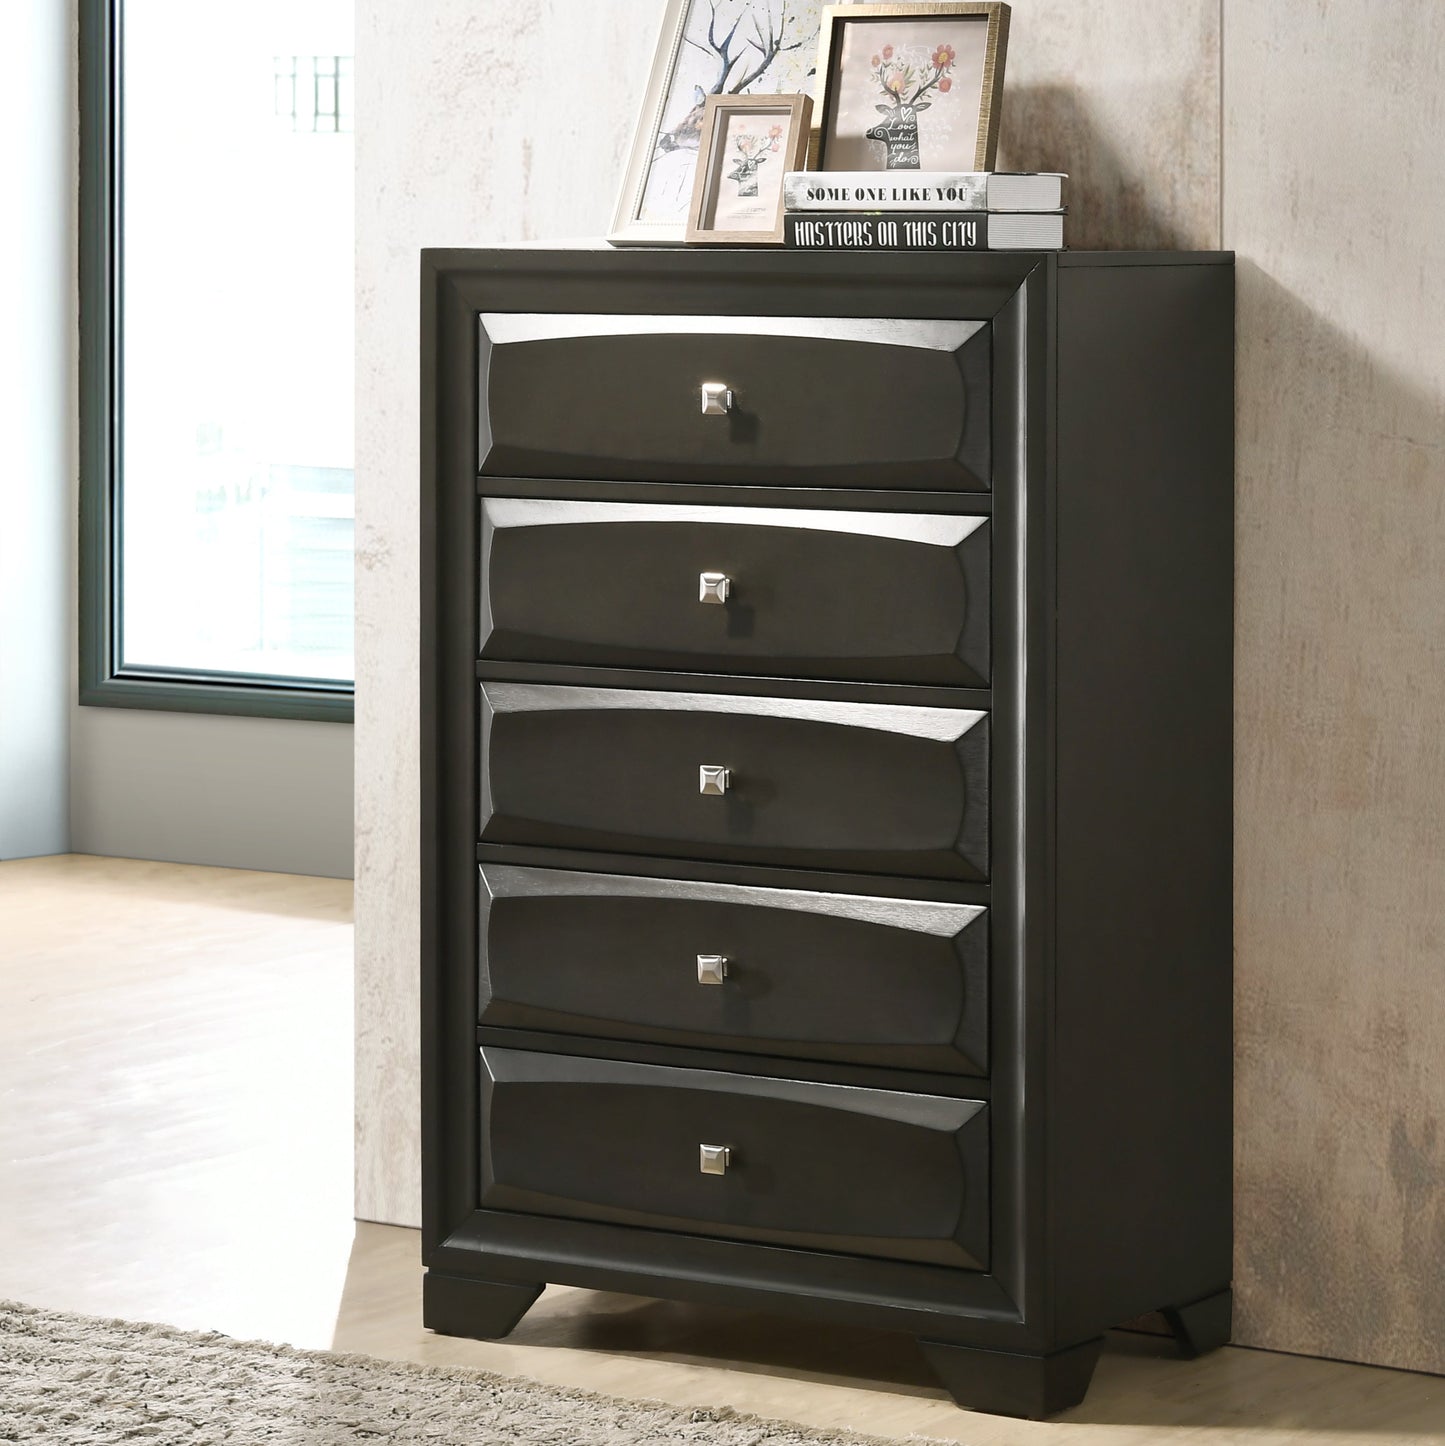 Oakland Antique Gray Finish Wood Bedroom Collection